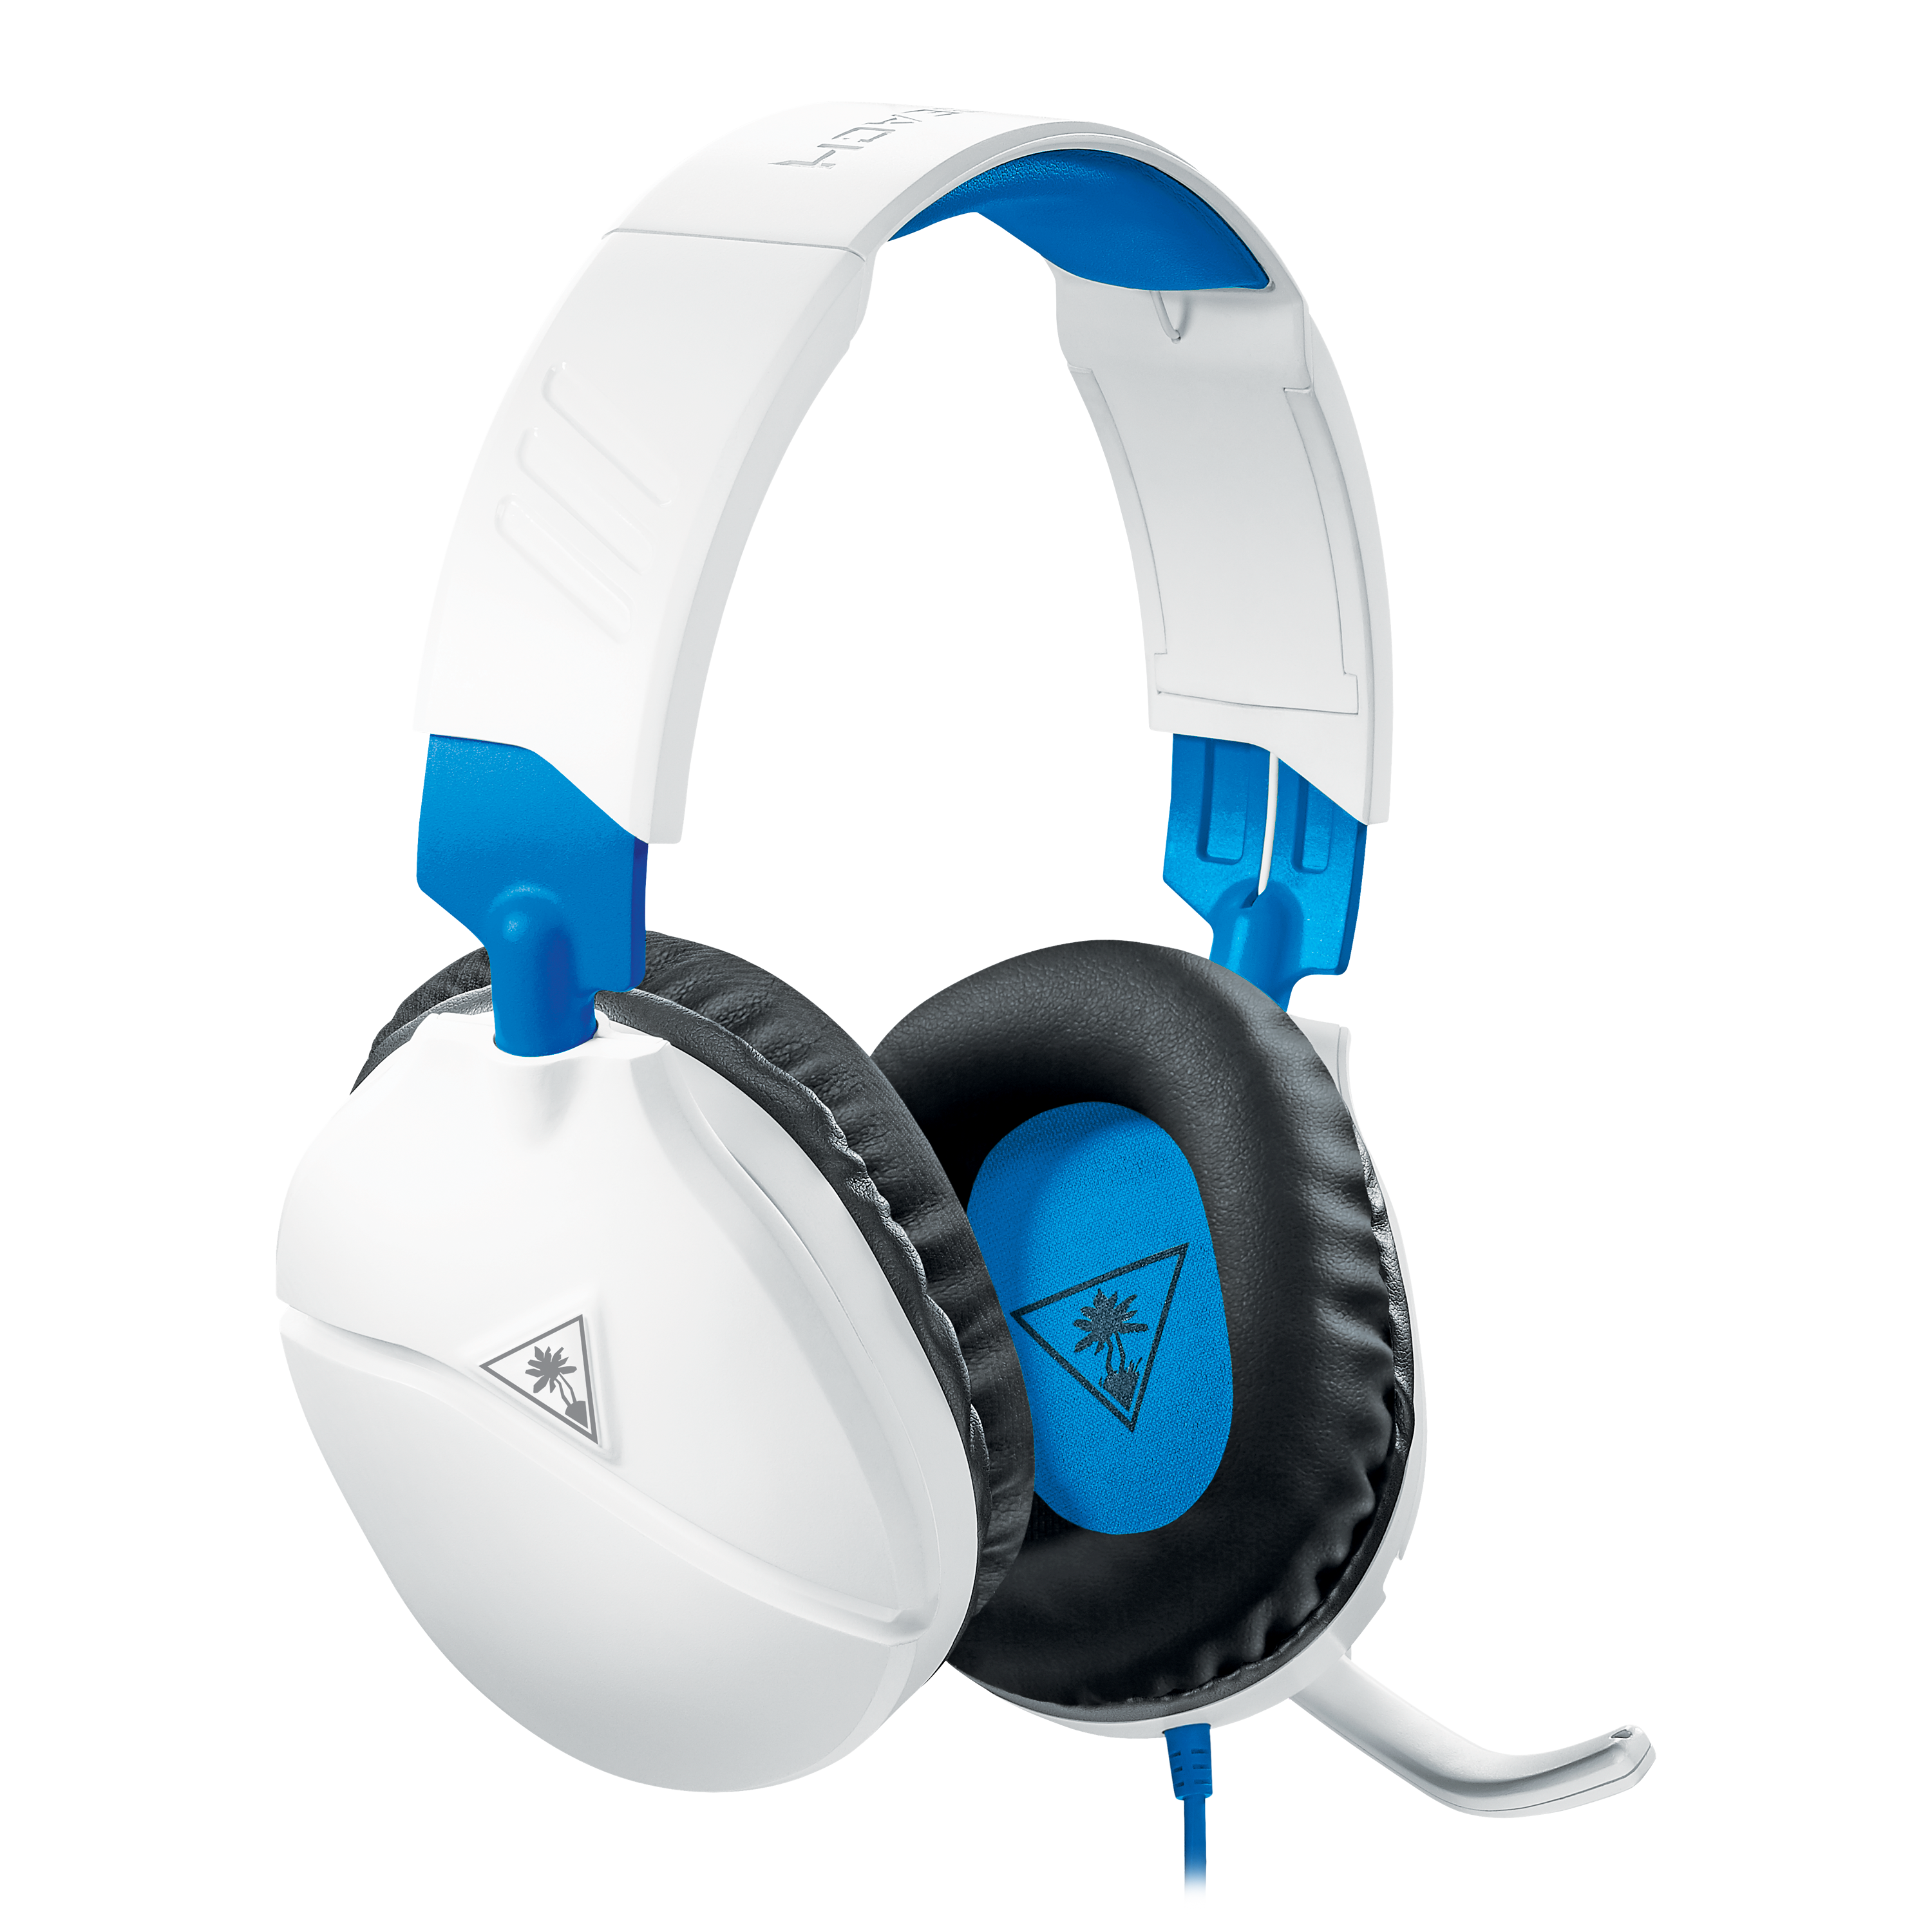 do you need a headset for ps4